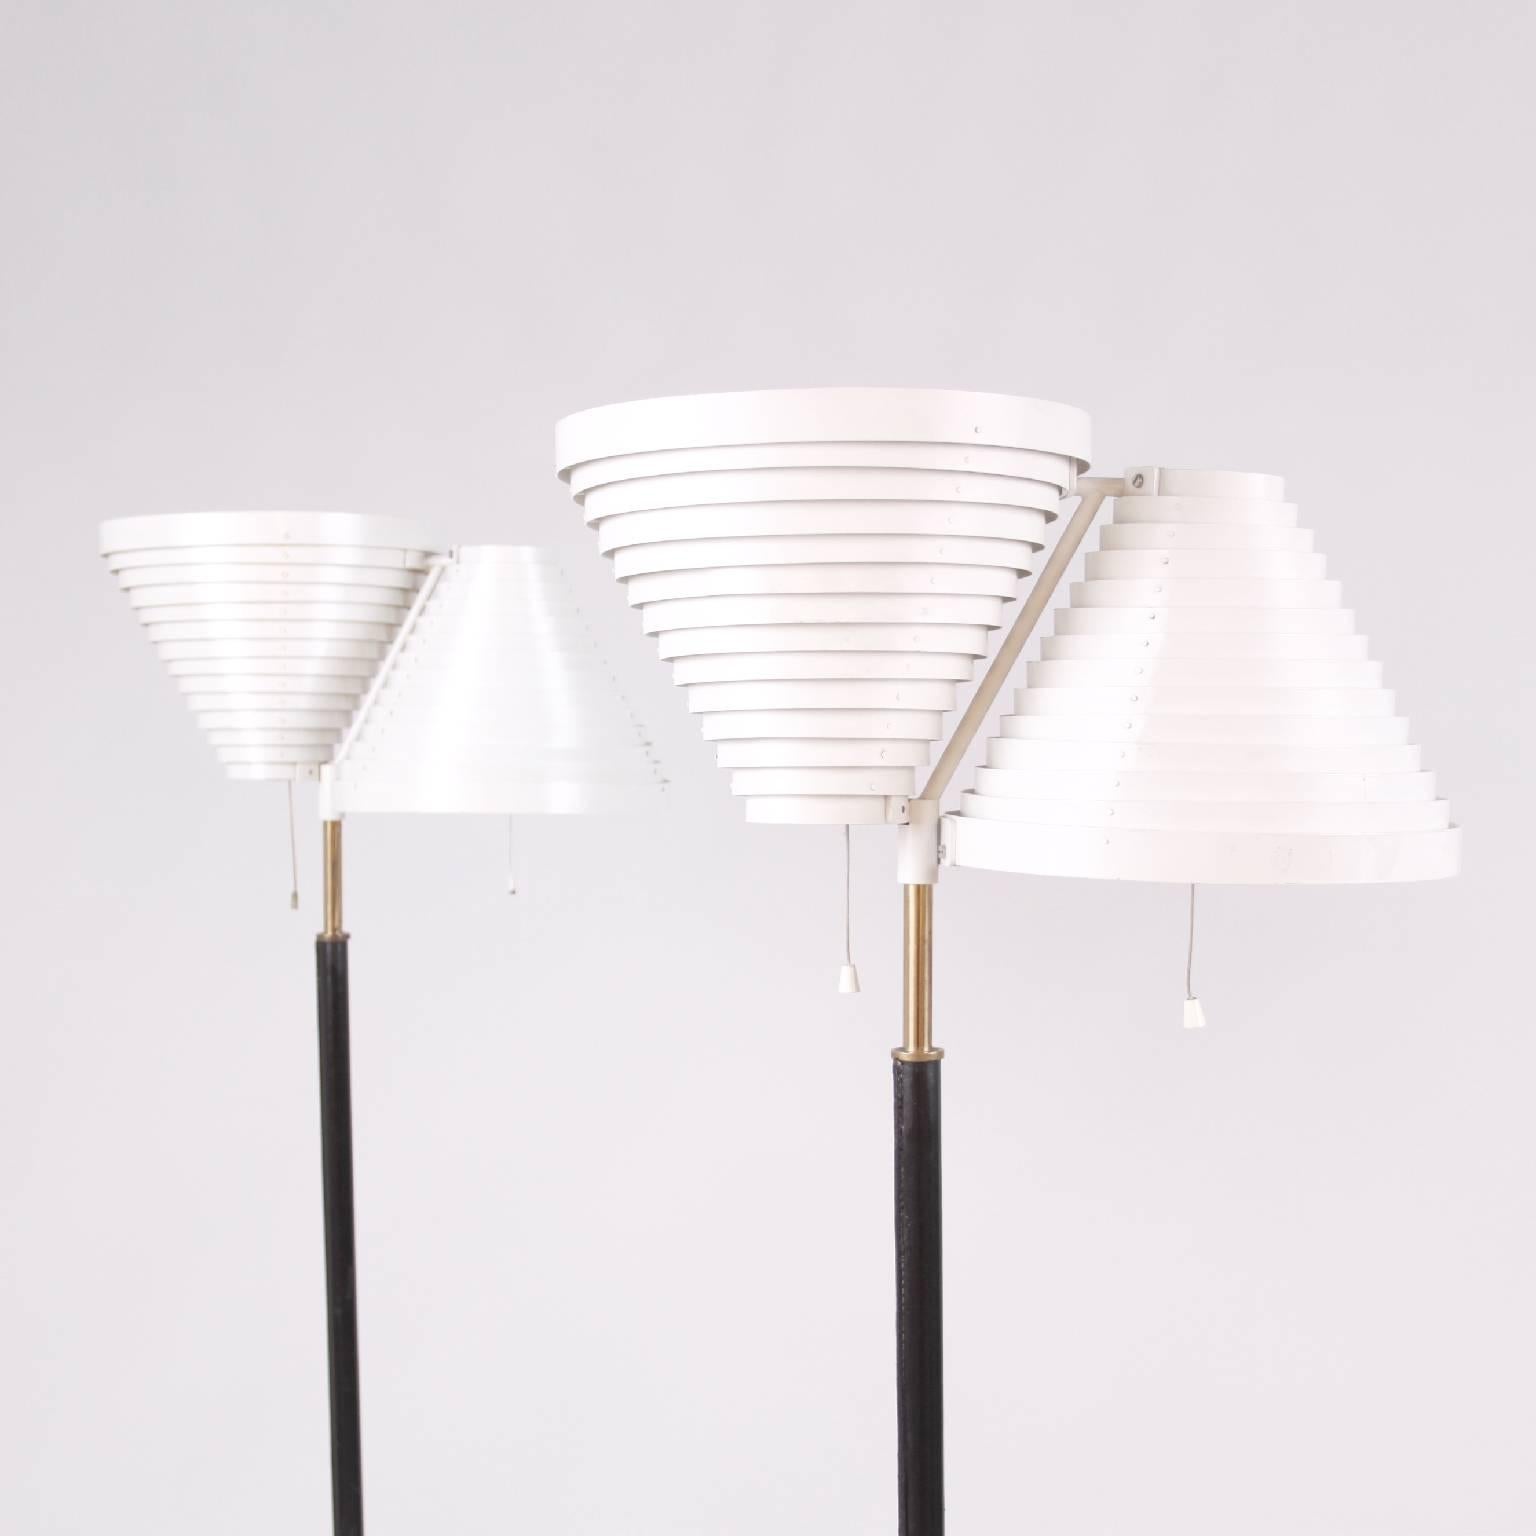 A rare pair of Alvar Aalto floor lamps model A810.
Manufactured by Valaistustyö Ky, Finland, 1950s.
Top of stem impressed with Valaistustyo/A 810 (First production).
Painted metal, brass, tubular brass, leather bound tubular metal, bound metal.